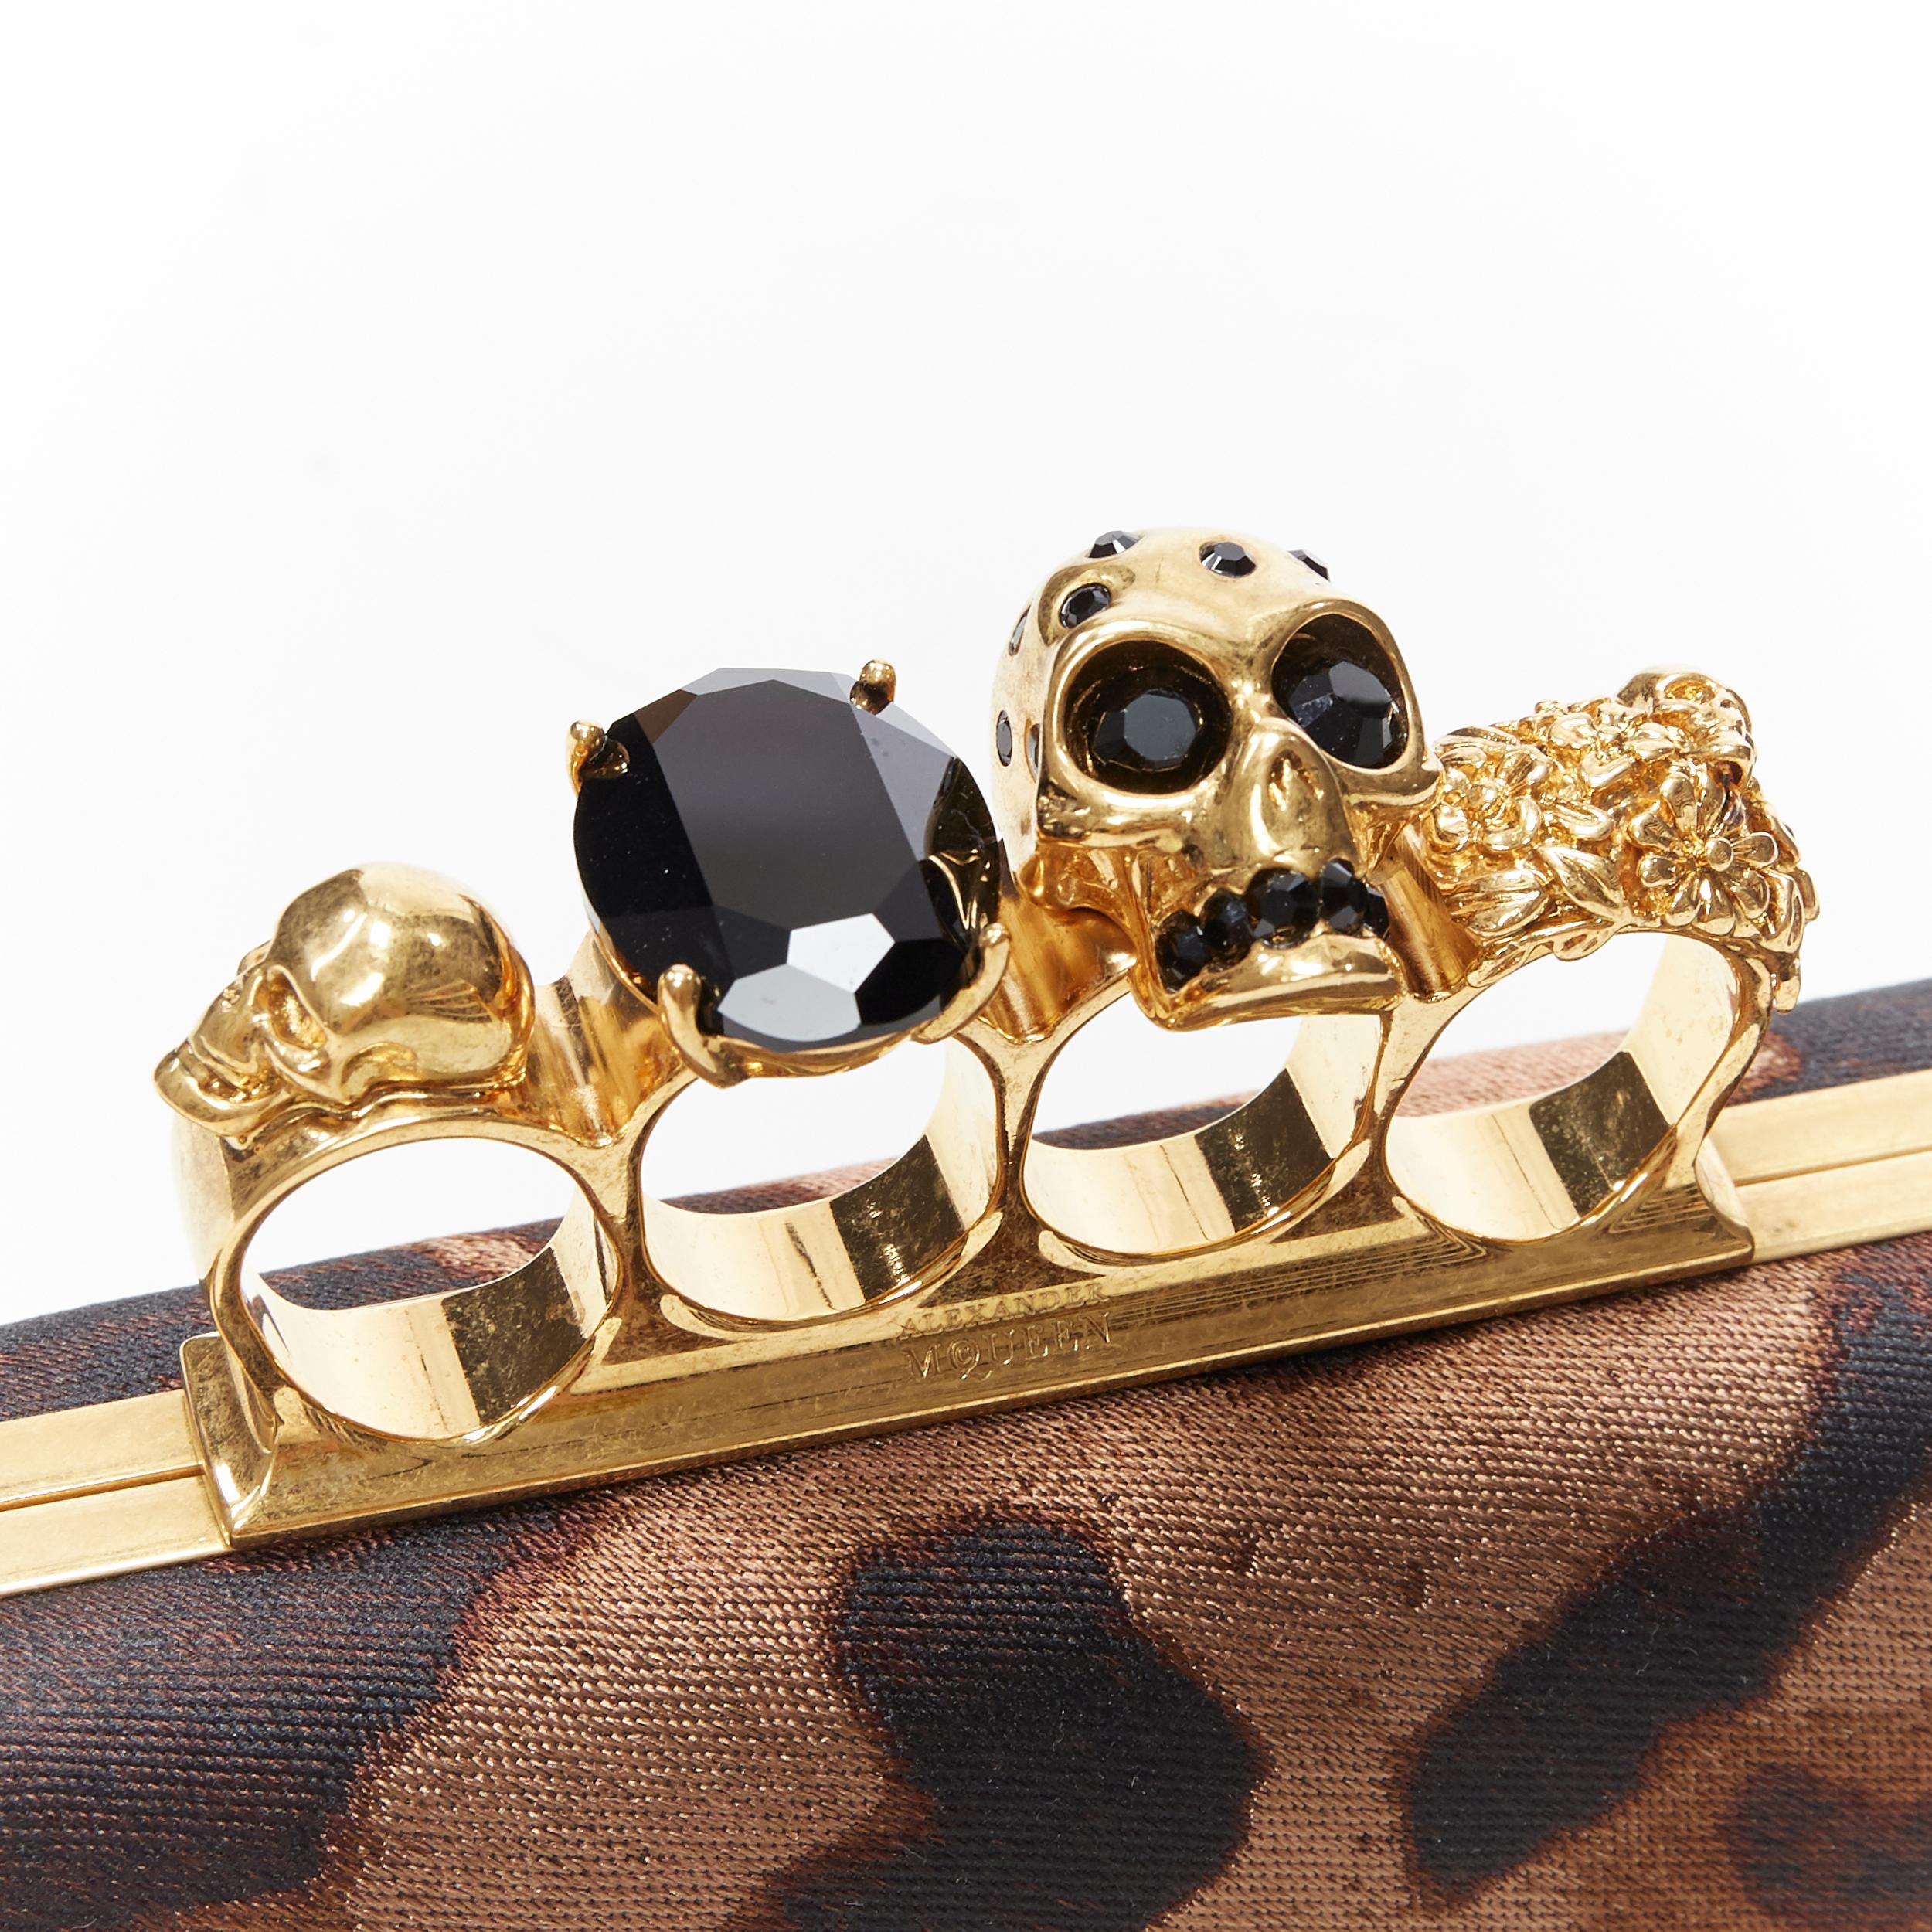 ALEXANDER MCQUEEN leopard print canvas 4-ring skull knuckleduster box clutch
Brand: Alexander McQueen
Designer: Alexander McQueen
Model Name / Style: Box clutch
Material: Fabric
Color: Brown
Pattern: Animal Print
Closure: Clasp
Lining material: